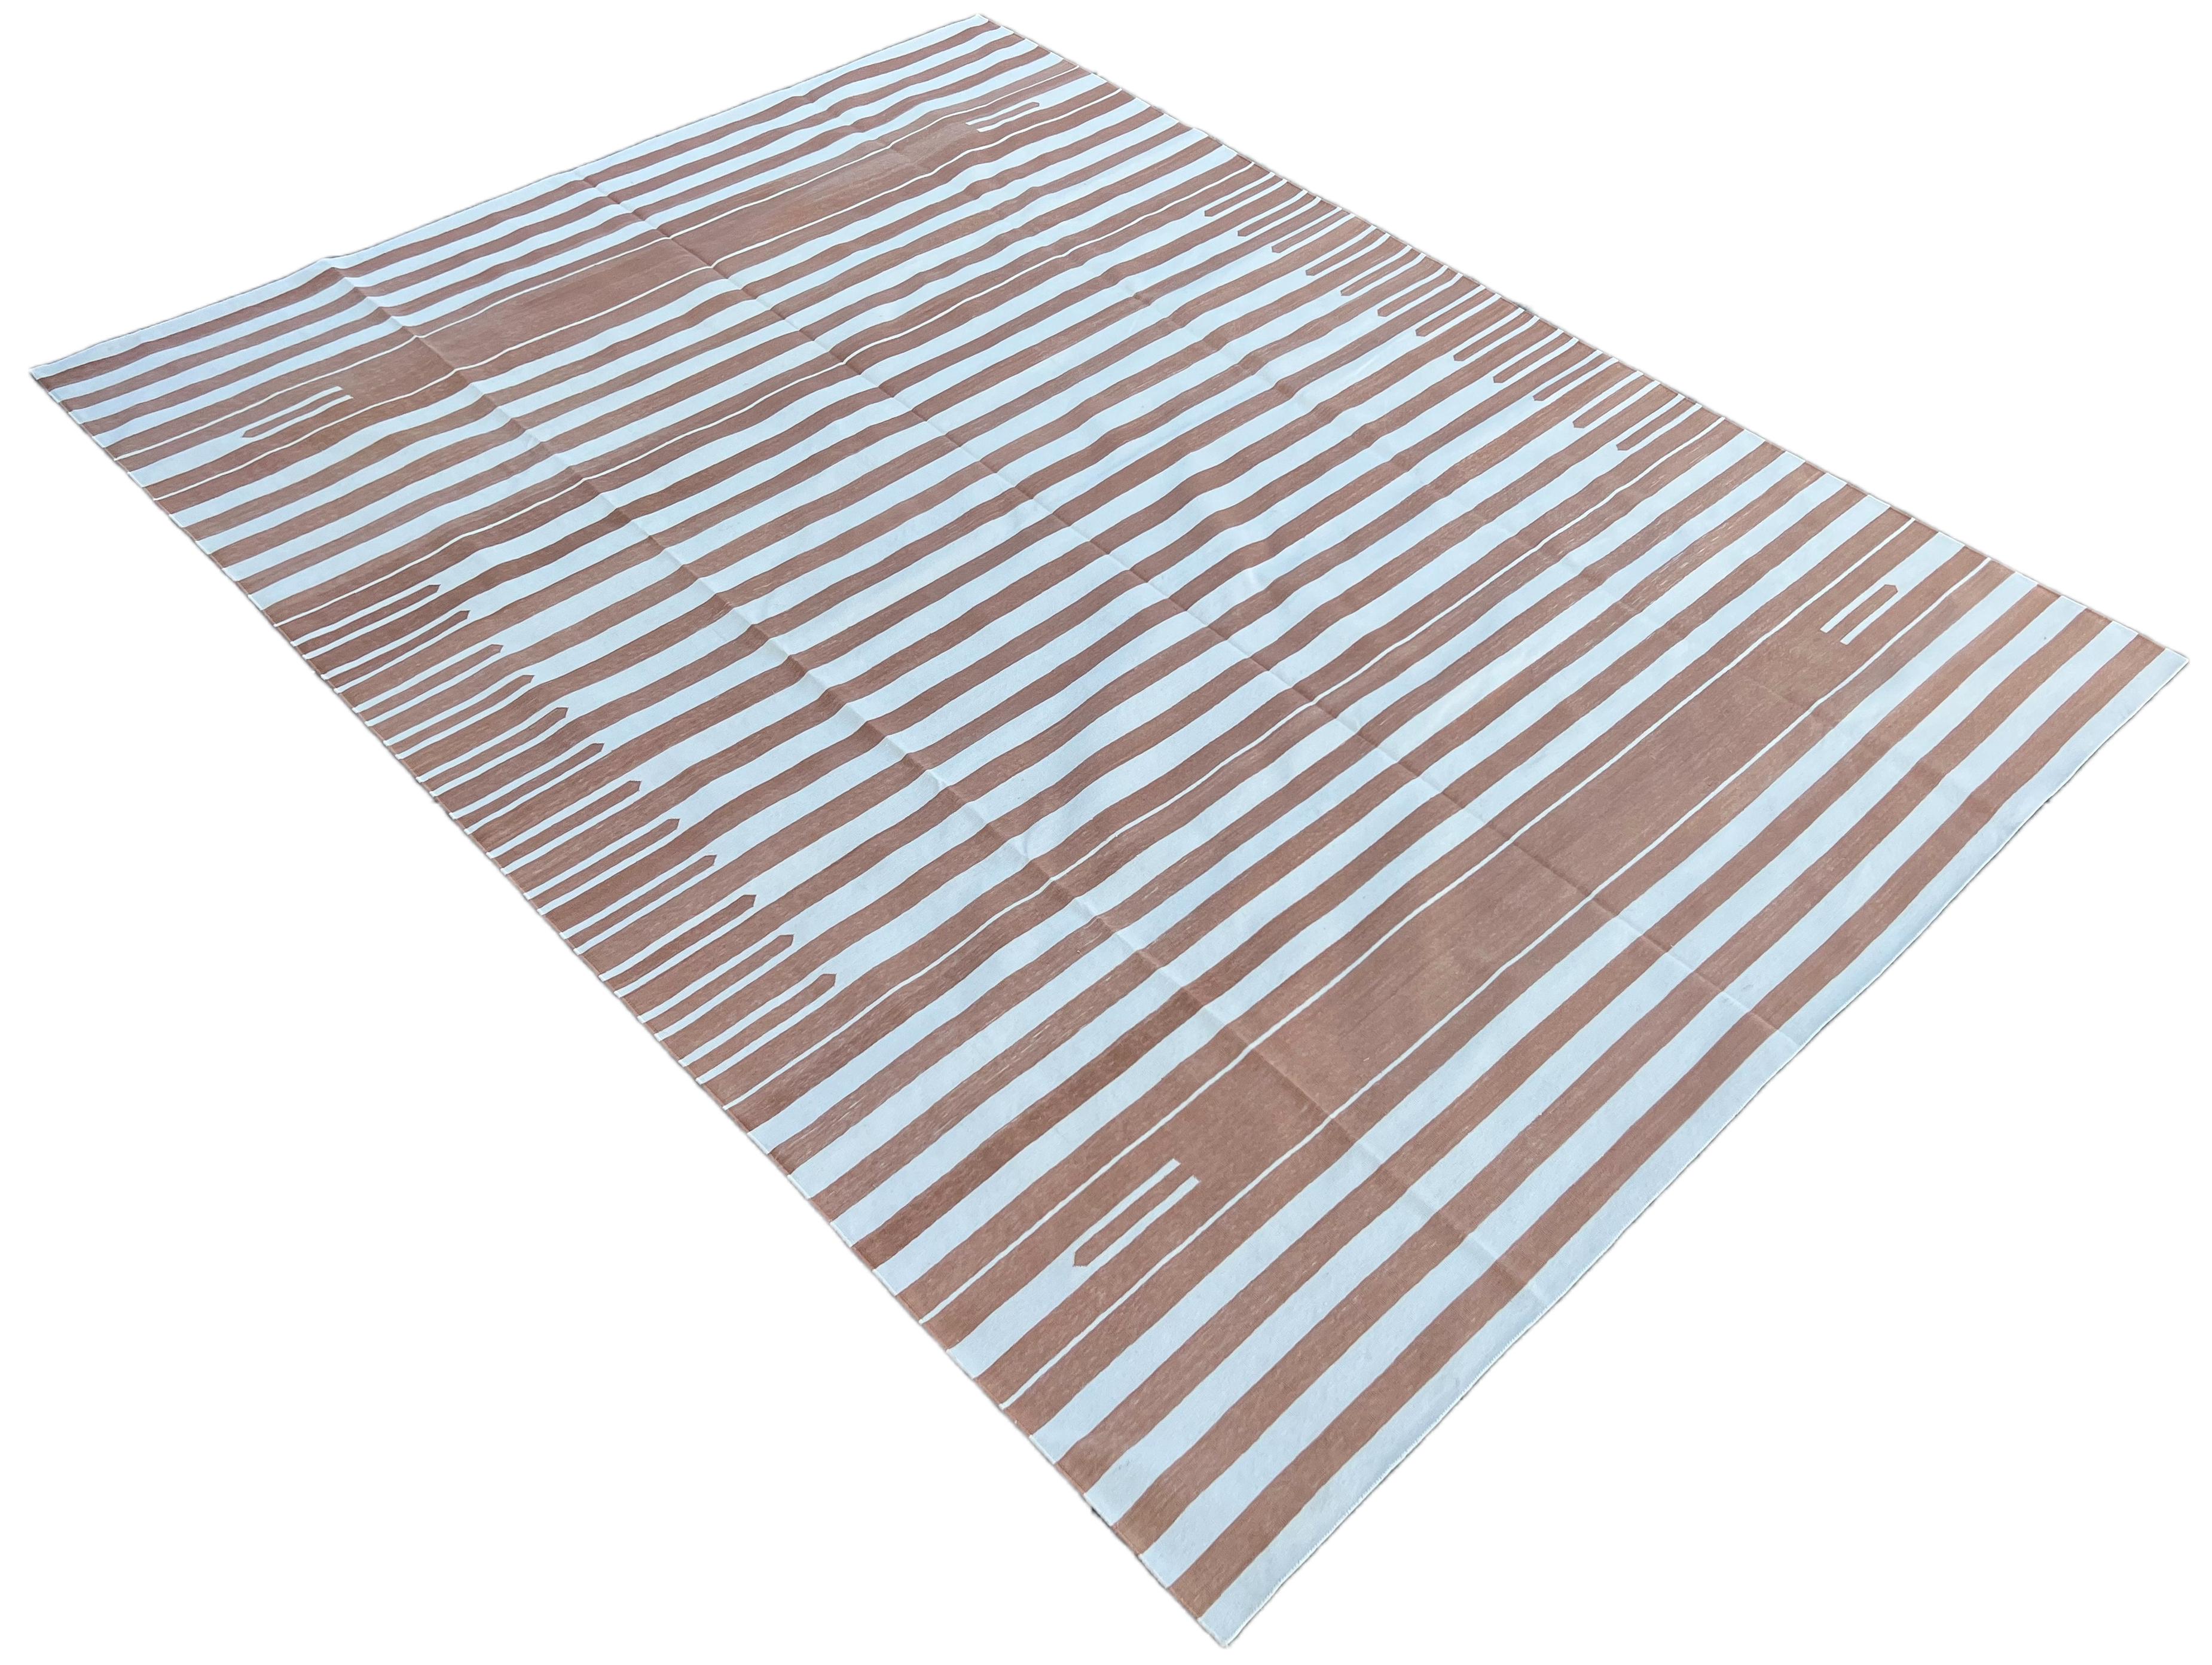 Handmade Cotton Area Flat Weave Rug, 9x12 Tan And White Striped Indian Dhurrie For Sale 4